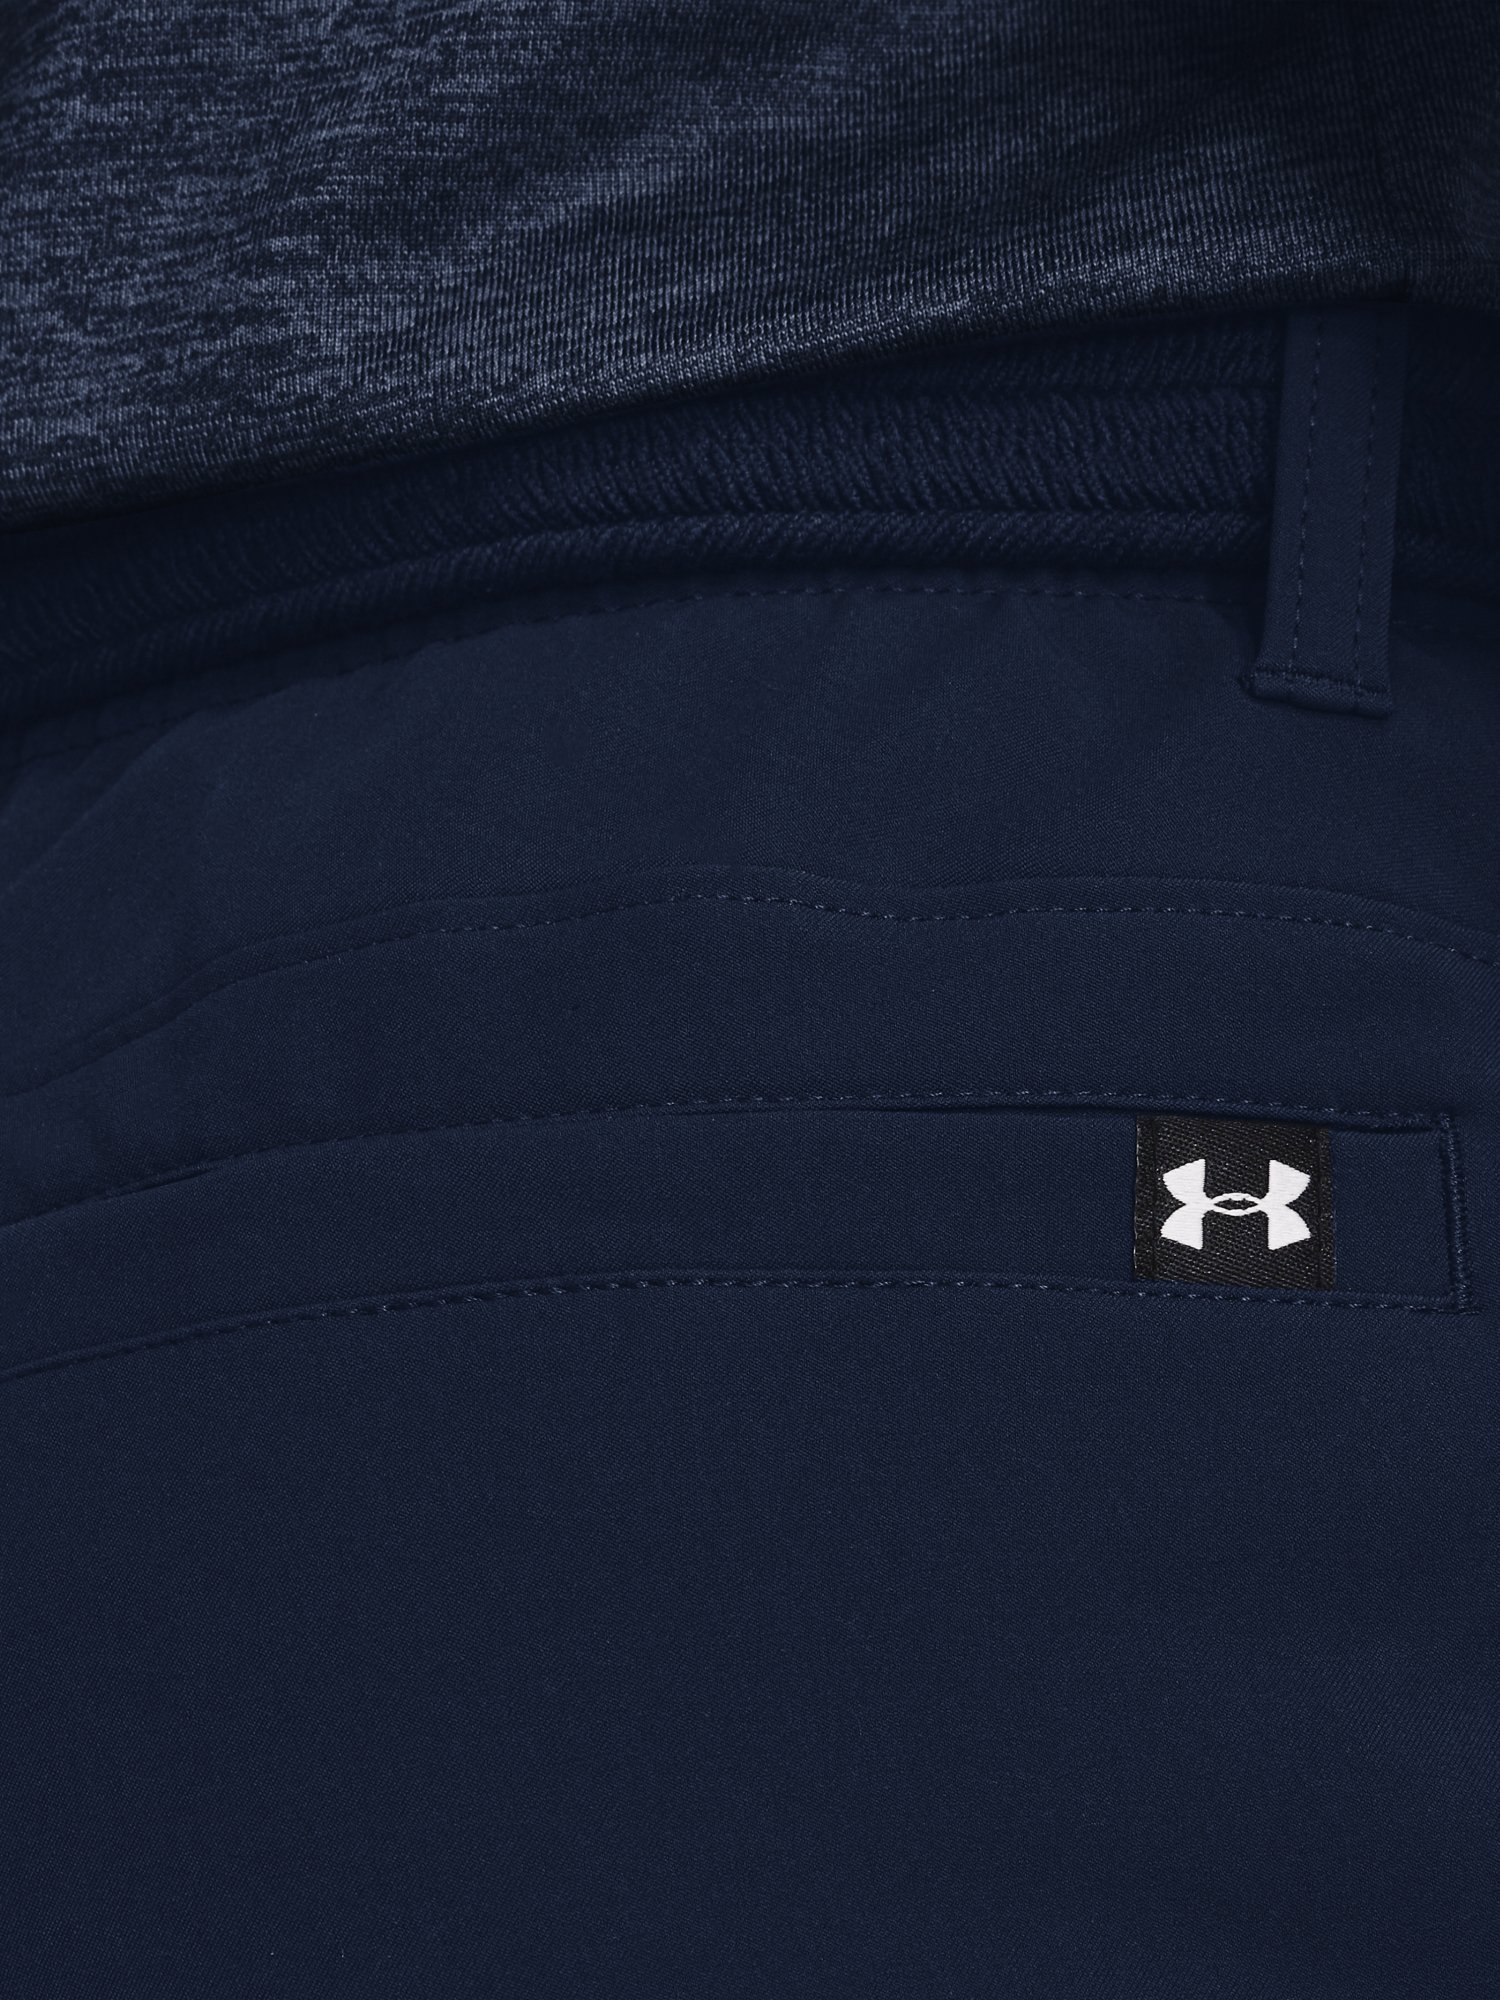 Nohavice Under Armour UA Drive Tapered Pant M - modrá